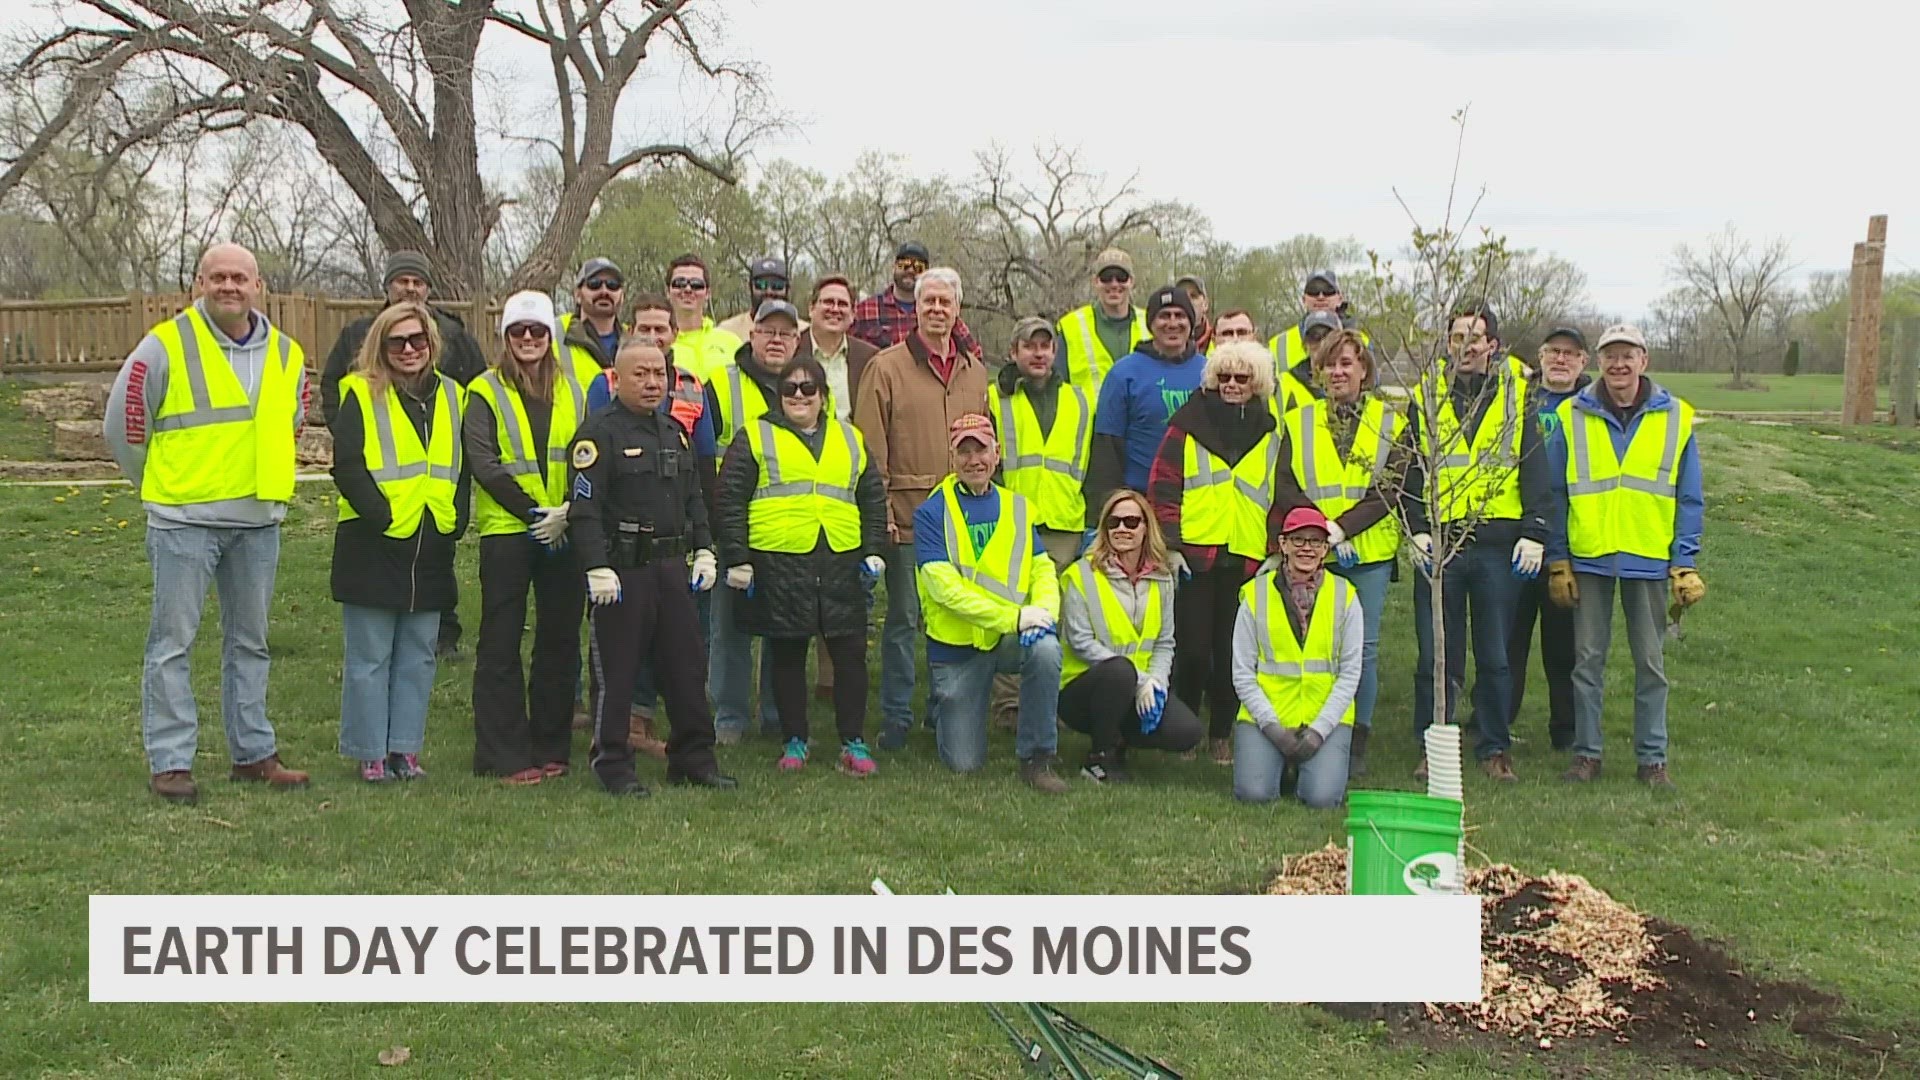 The Earth Day Trash Bash took place at 70 sites across Des Moines, with 4,500 volunteers participating.